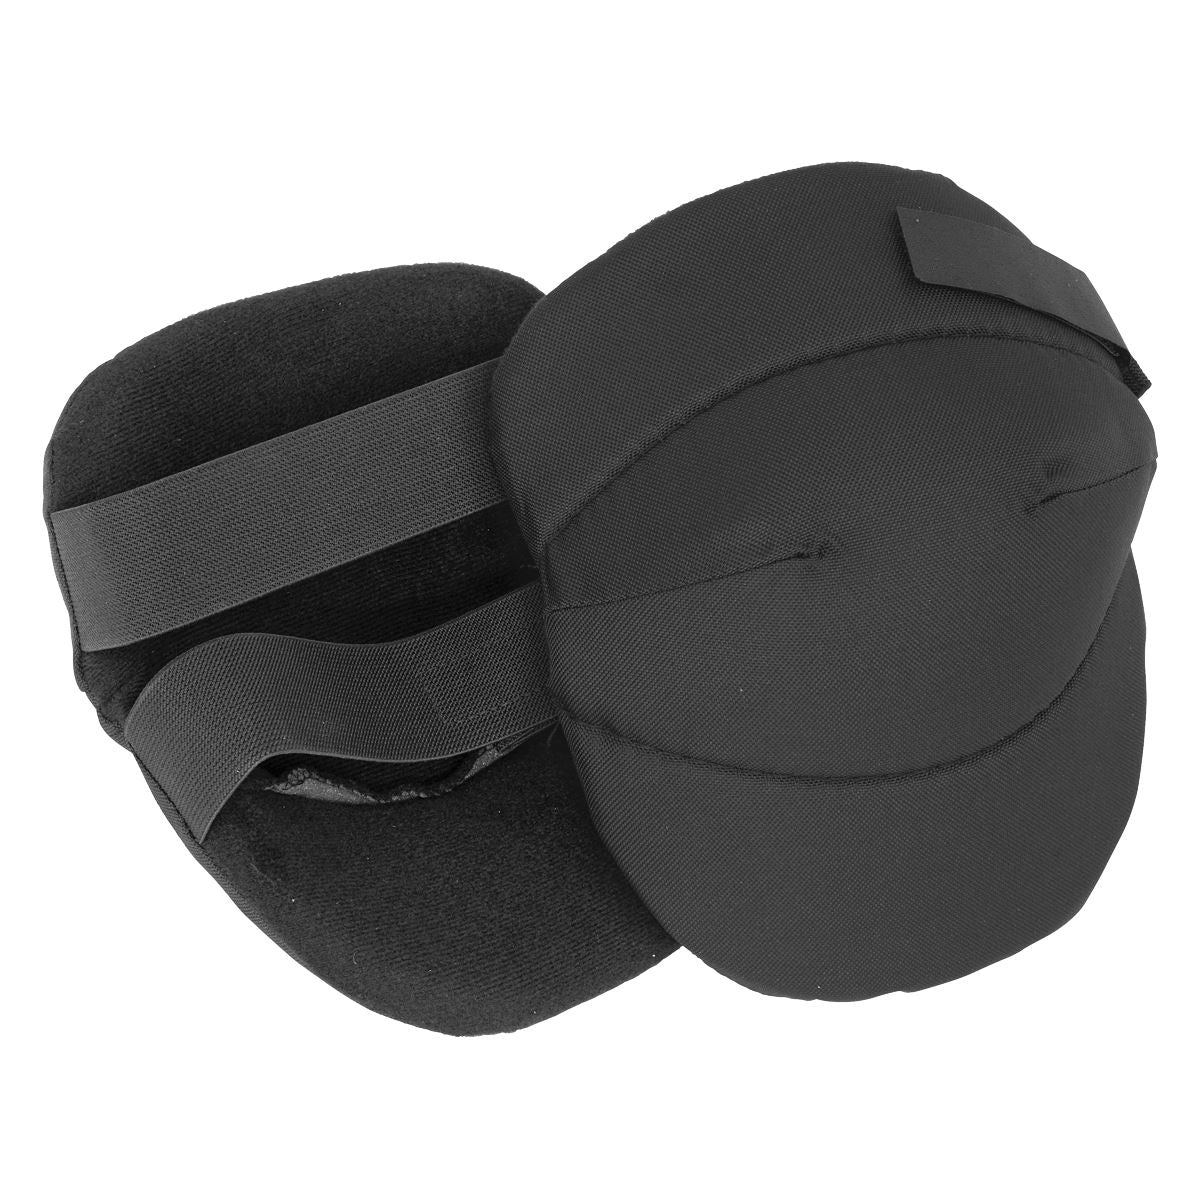 Worksafe by Sealey Comfort Knee Pads - Pair